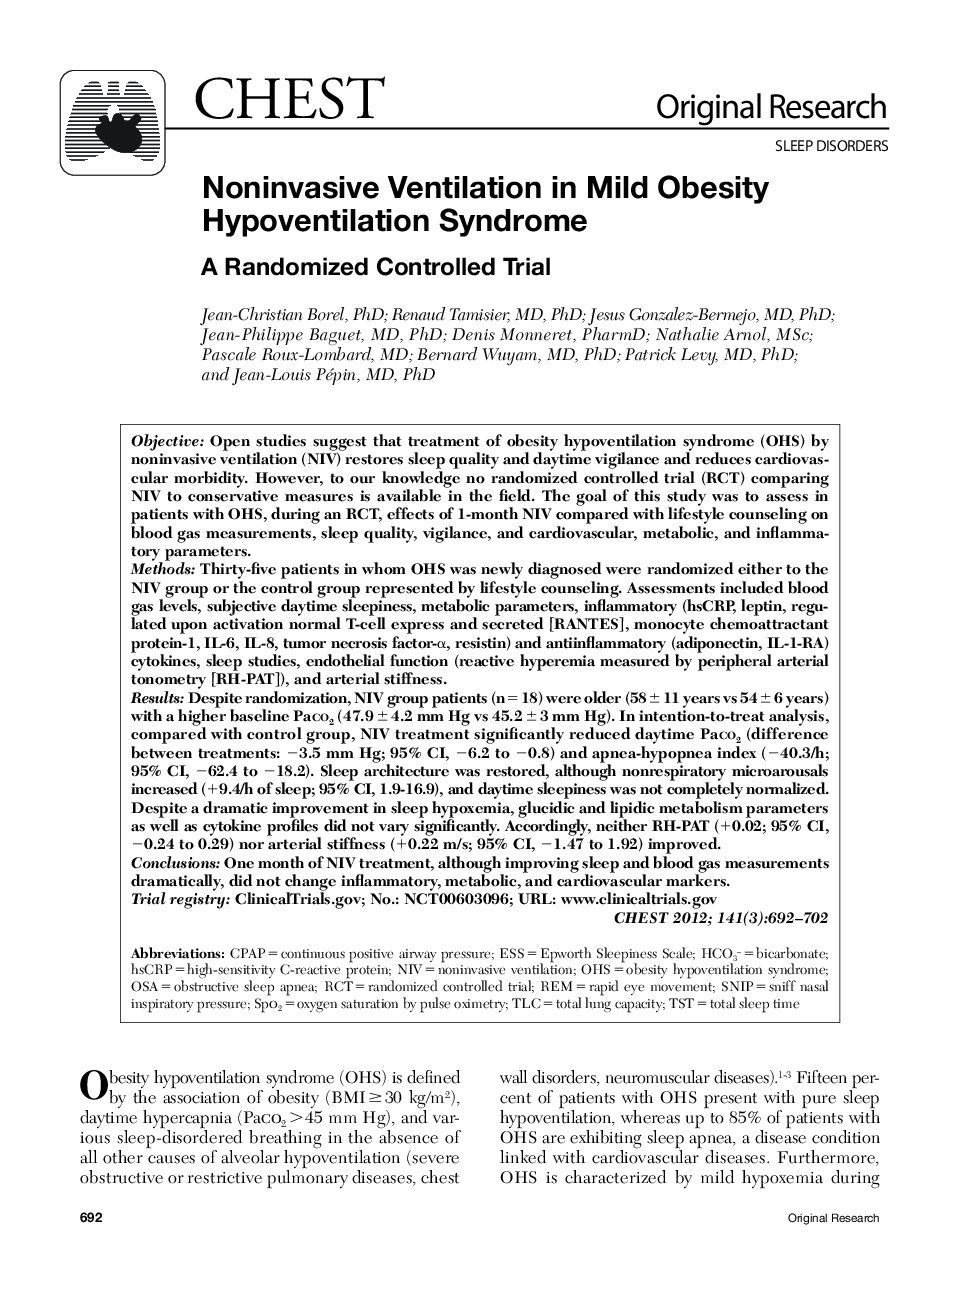 Noninvasive Ventilation in Mild Obesity Hypoventilation Syndrome : A Randomized Controlled Trial